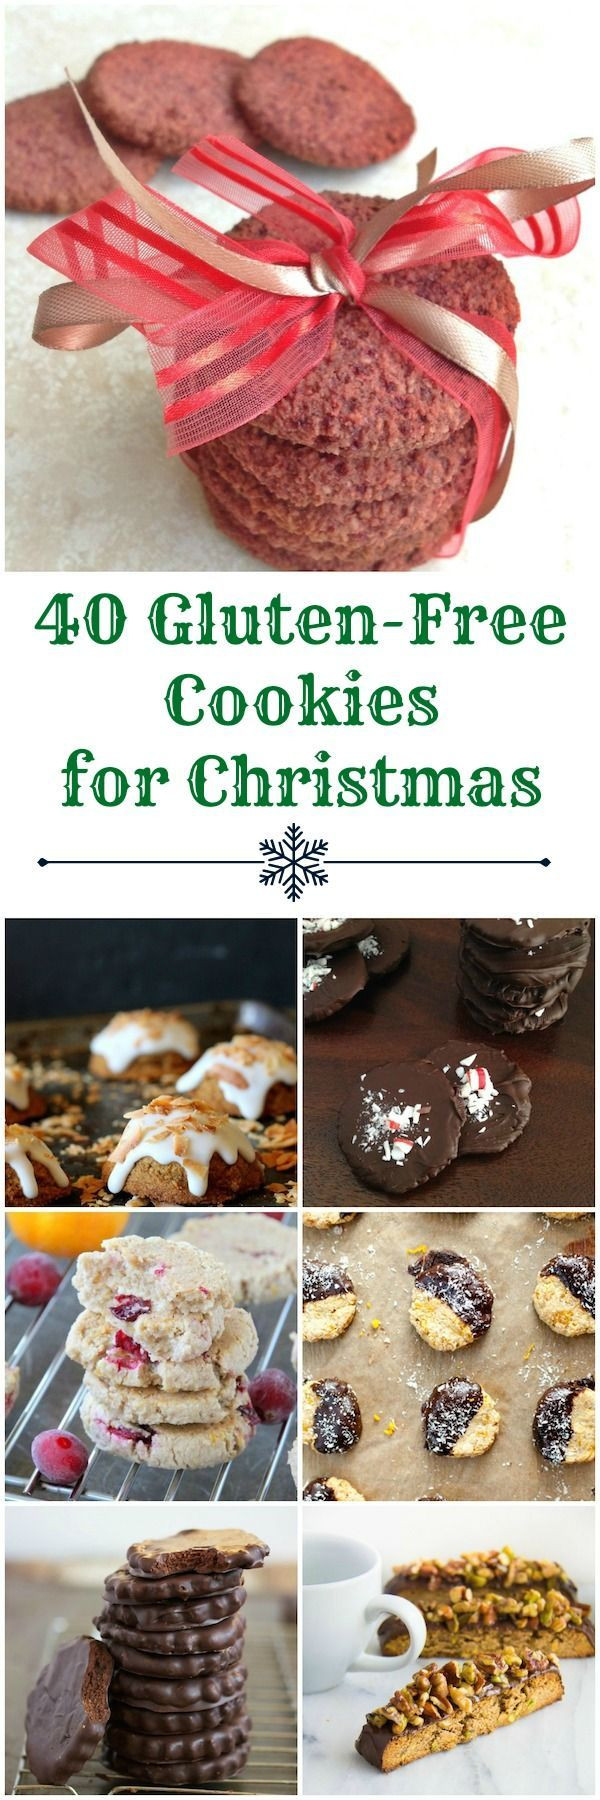 Best Gluten Free Christmas Cookies
 100 Christmas Cookie Recipes on Pinterest